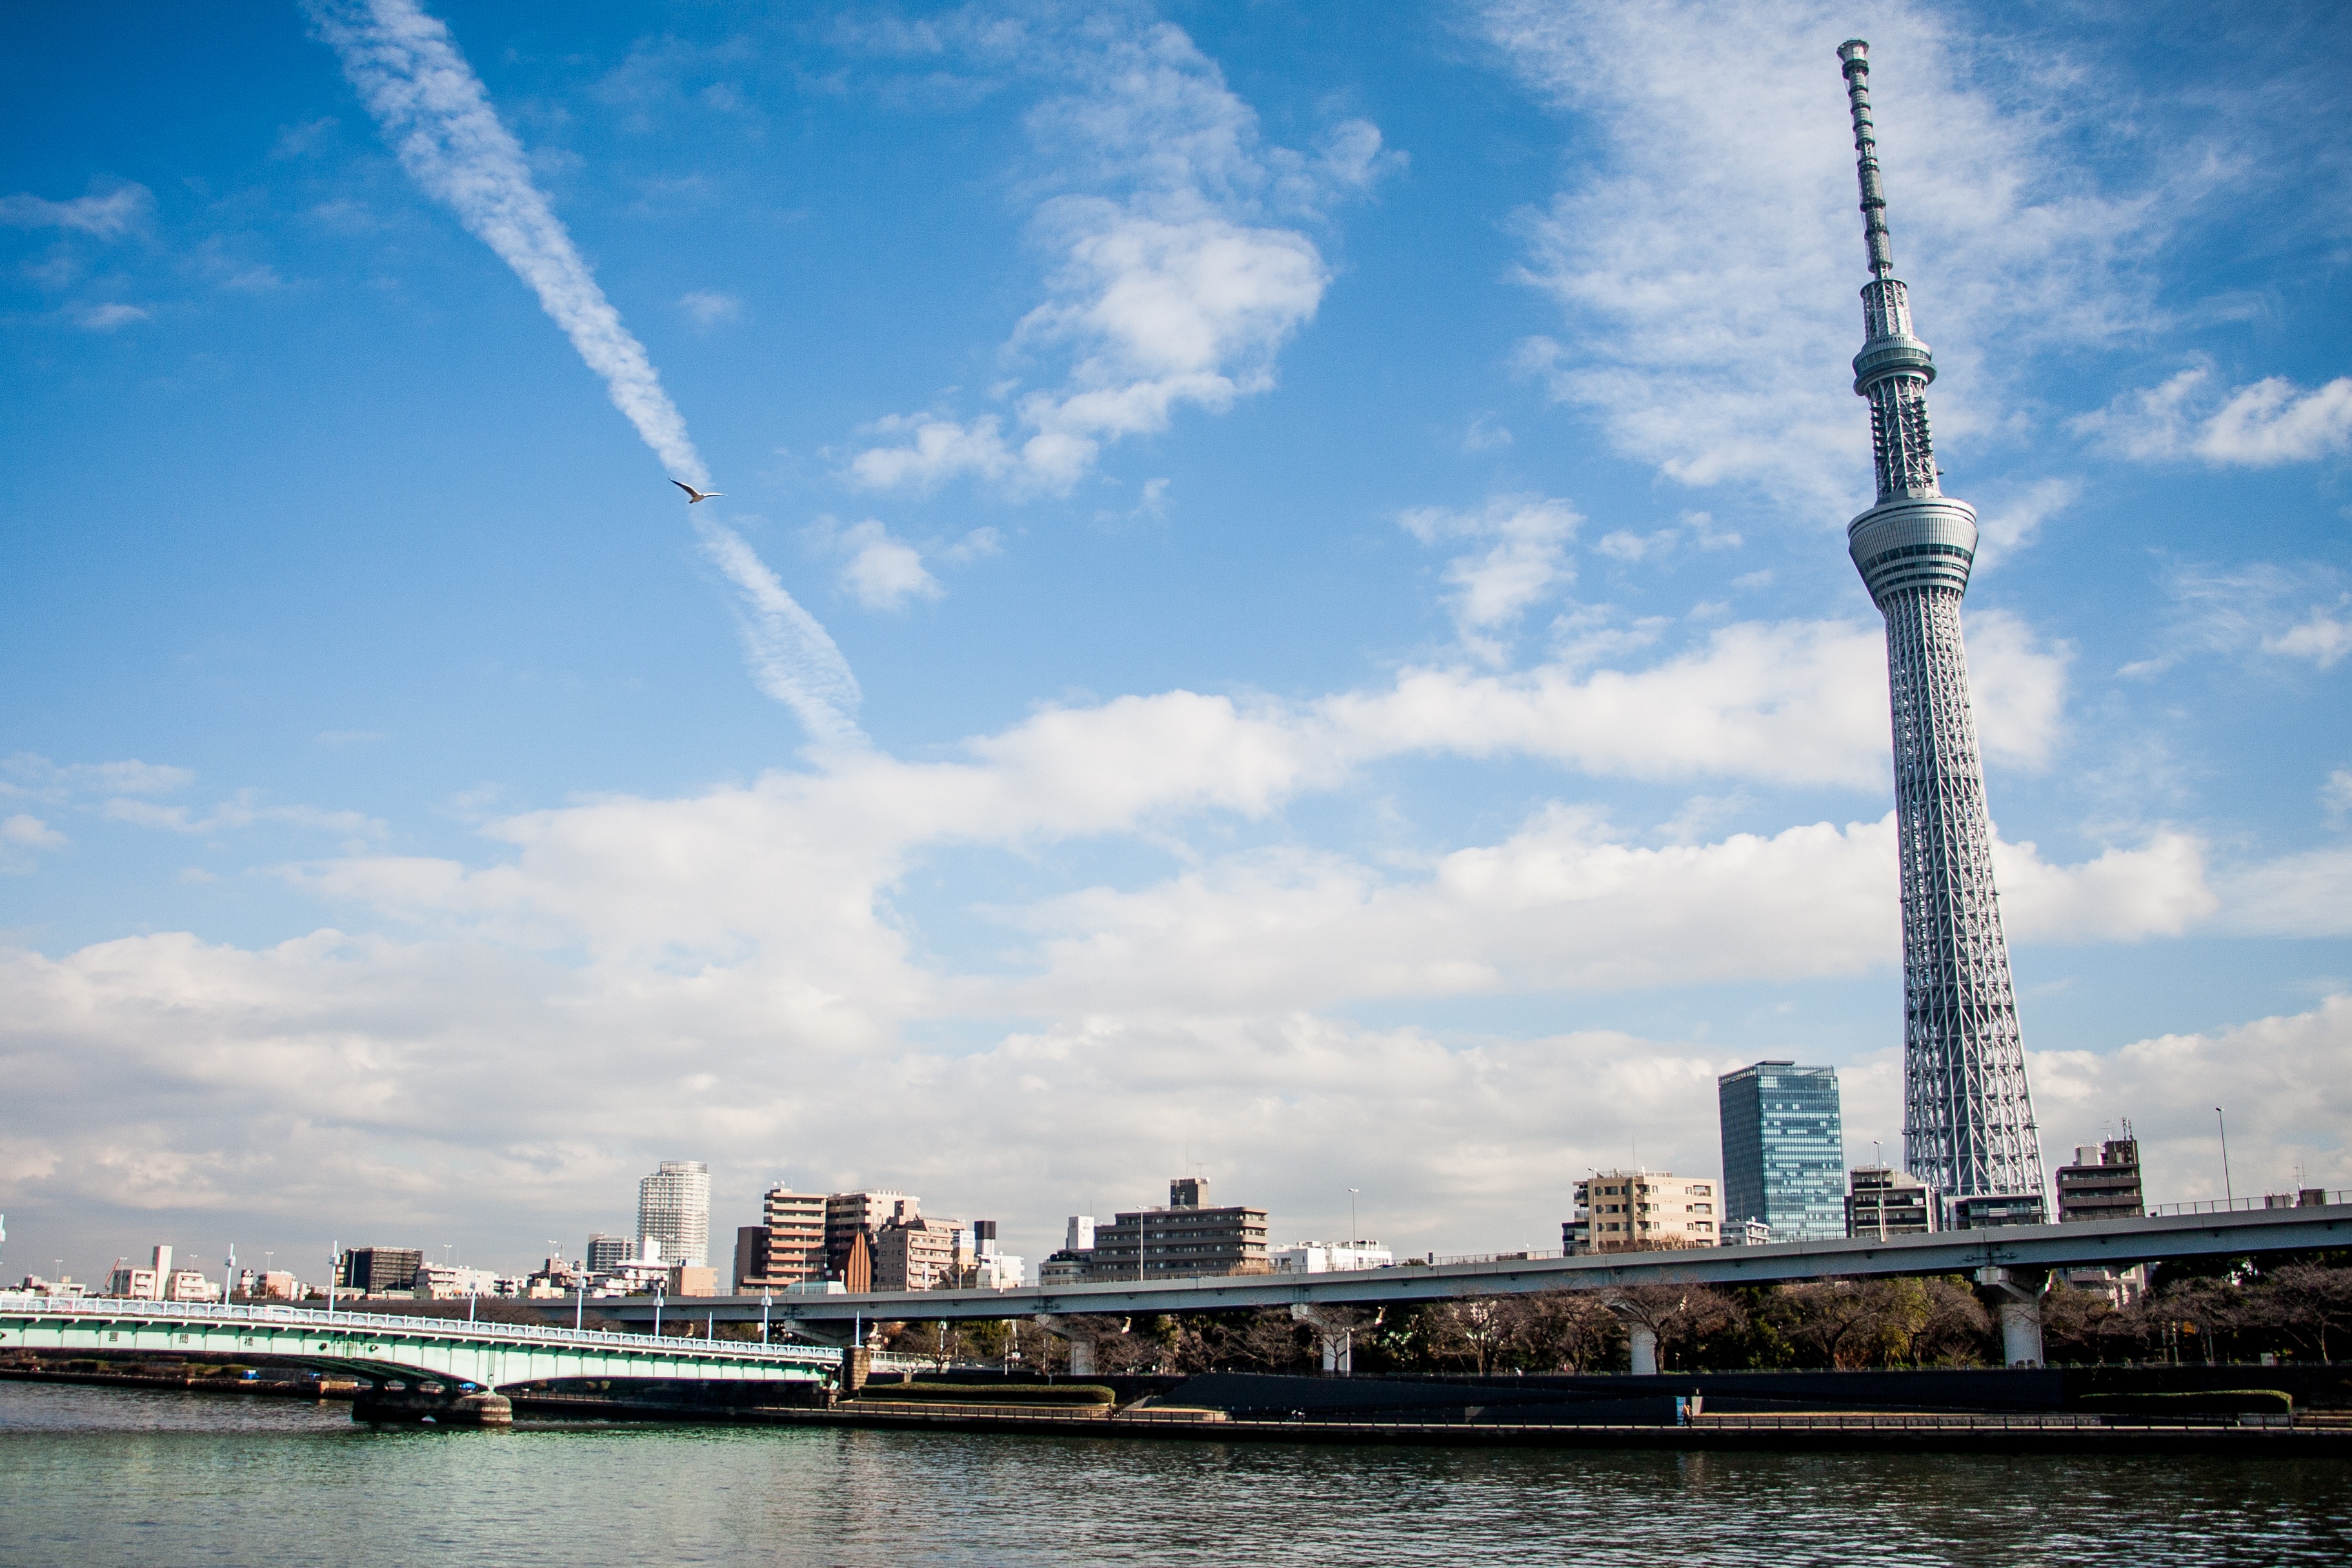 Nature of Tokyo Skytree